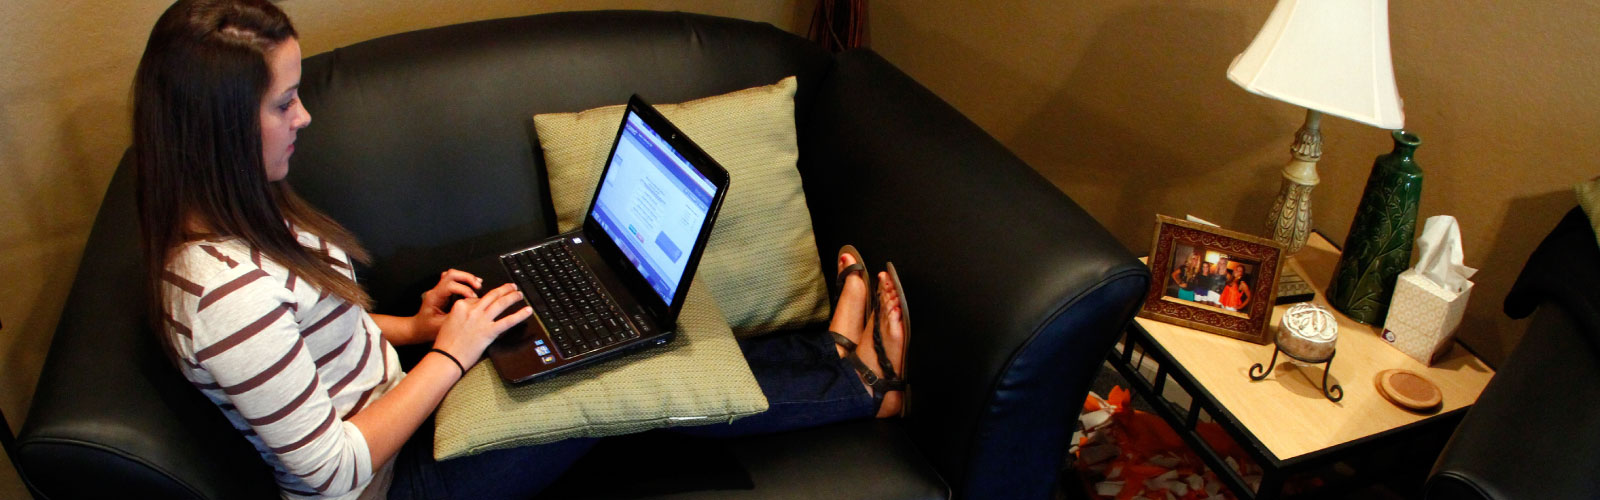 Student on a couch with a laptop